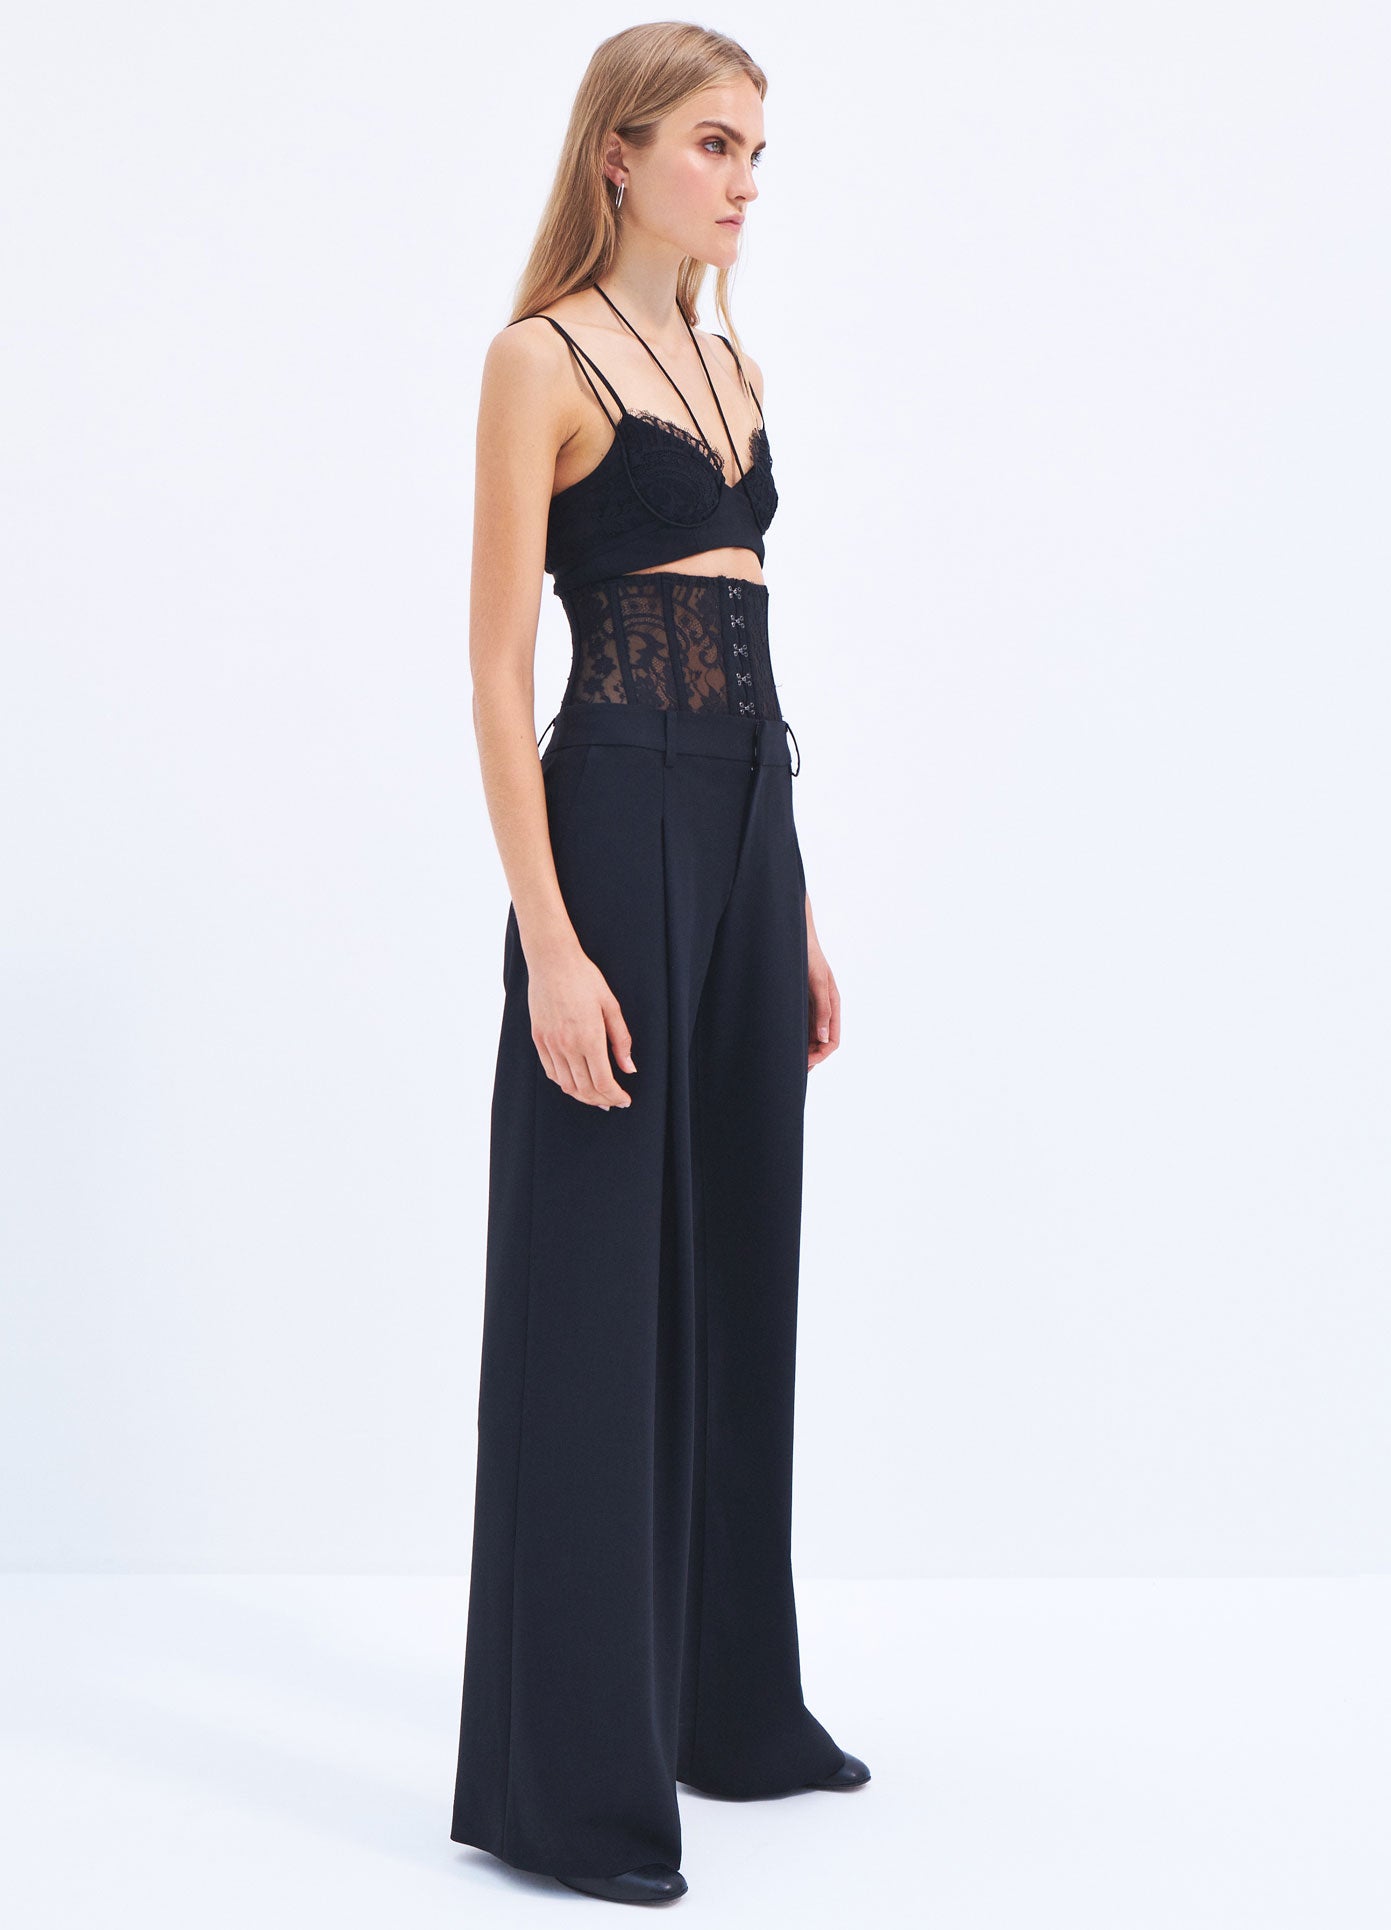 MONSE Spring 2024 Lace Bustier Trousers in Black on model full side view